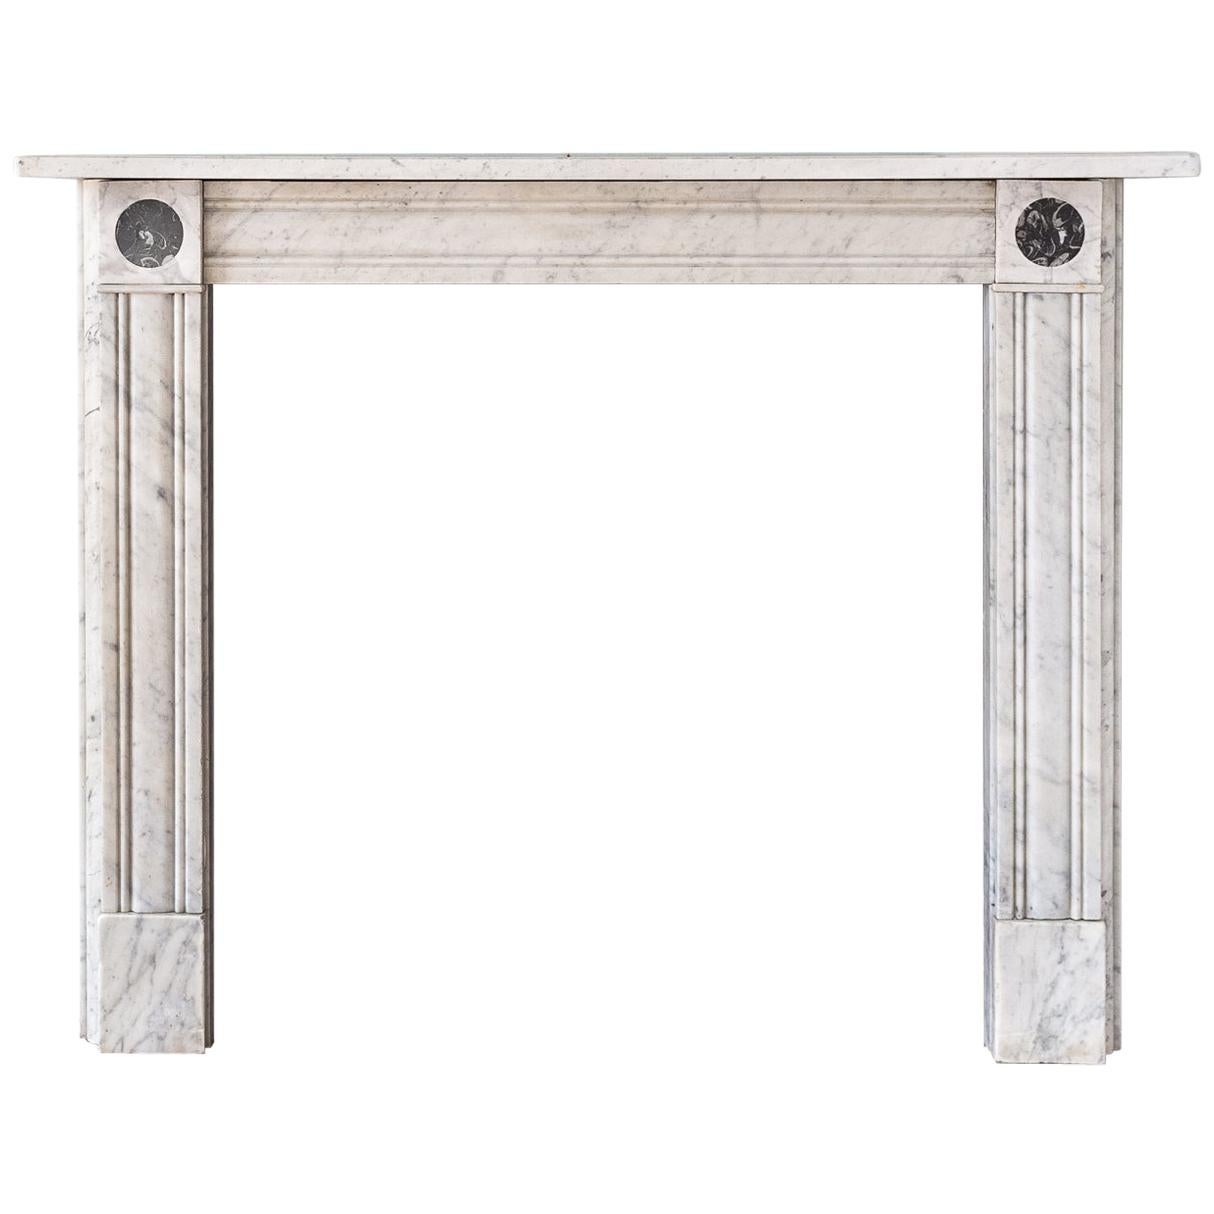 Regency Style Carrara Marble Fireplace with Peacock's Eye Roundels